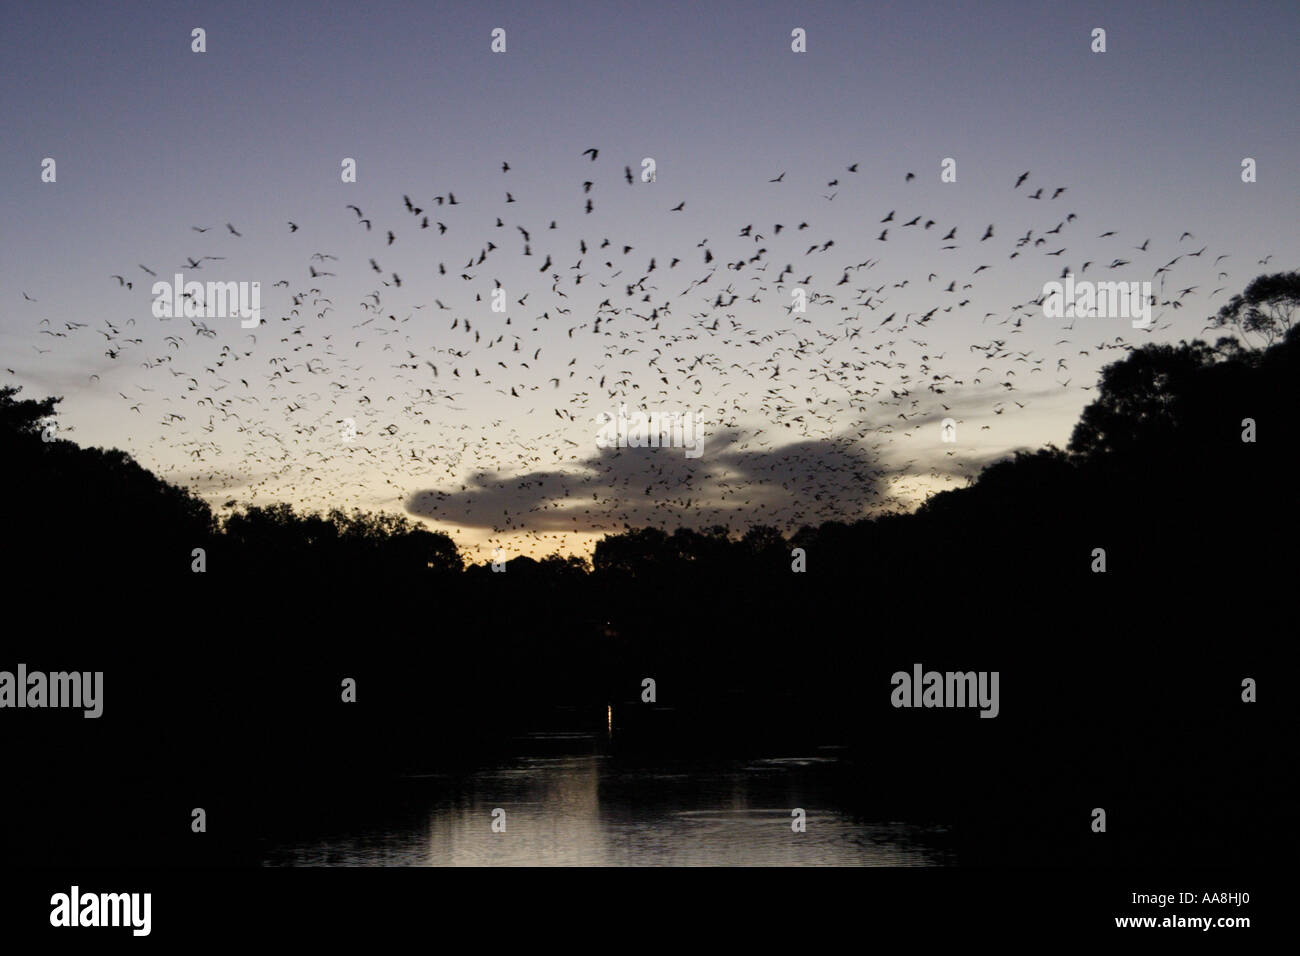 A COLONY OF GREY HEADED FLYING FOXES FLYING IN THE EVENING SKY BAPDB7268 Stock Photo